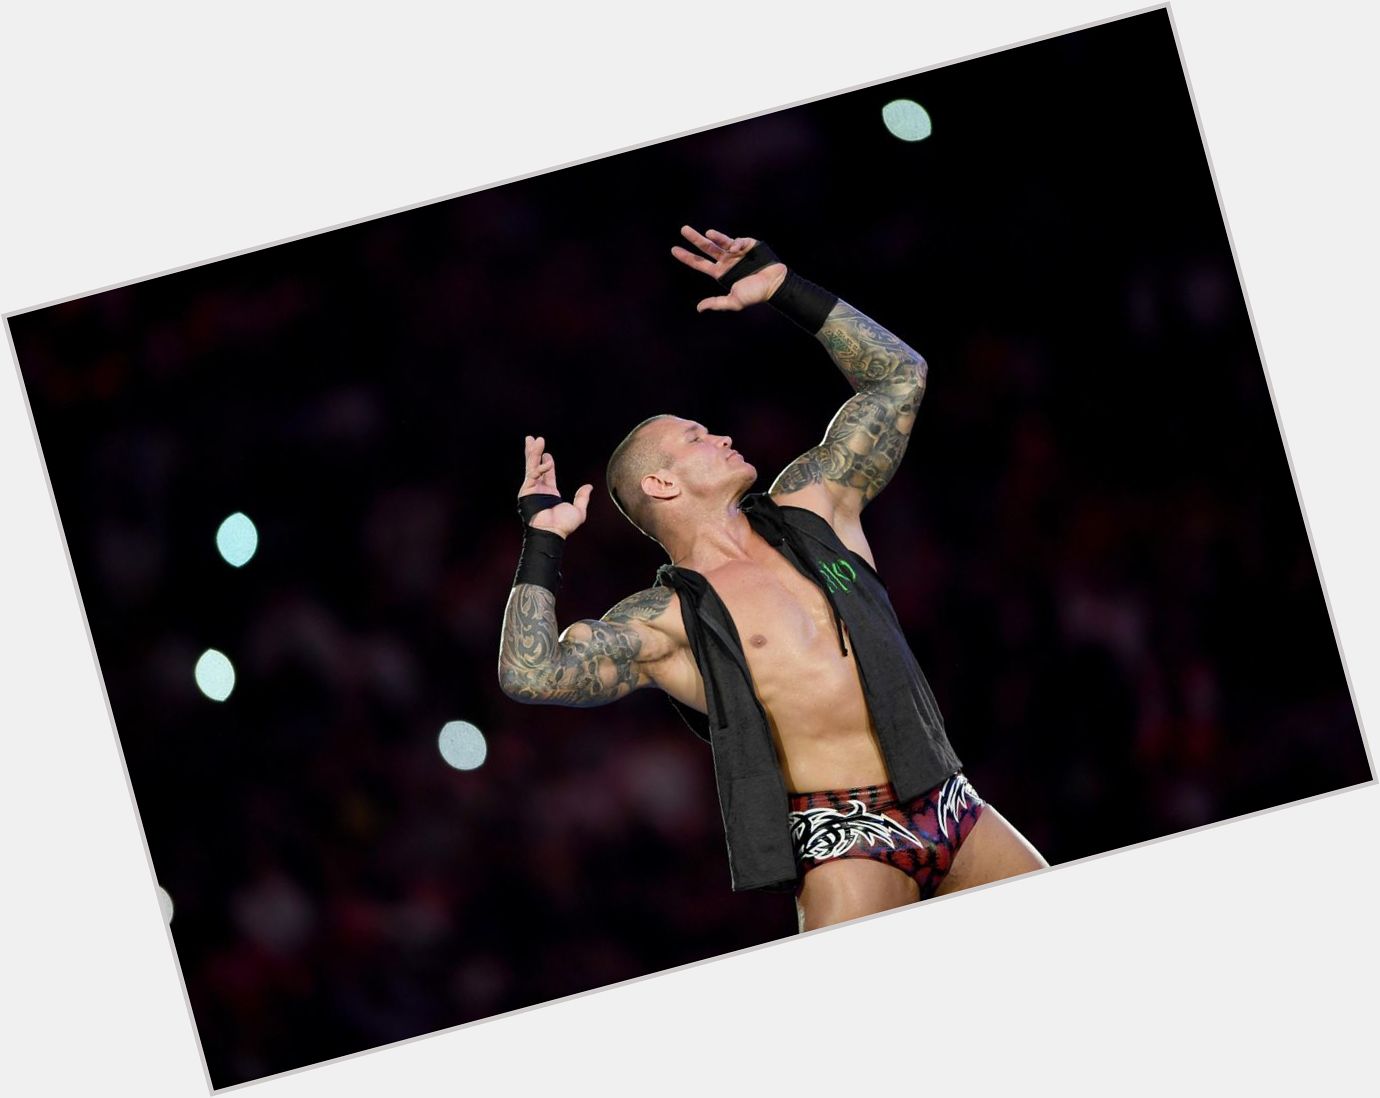 The Beermat wishes 14 time world champion Randy Orton a happy birthday

Have a good one  